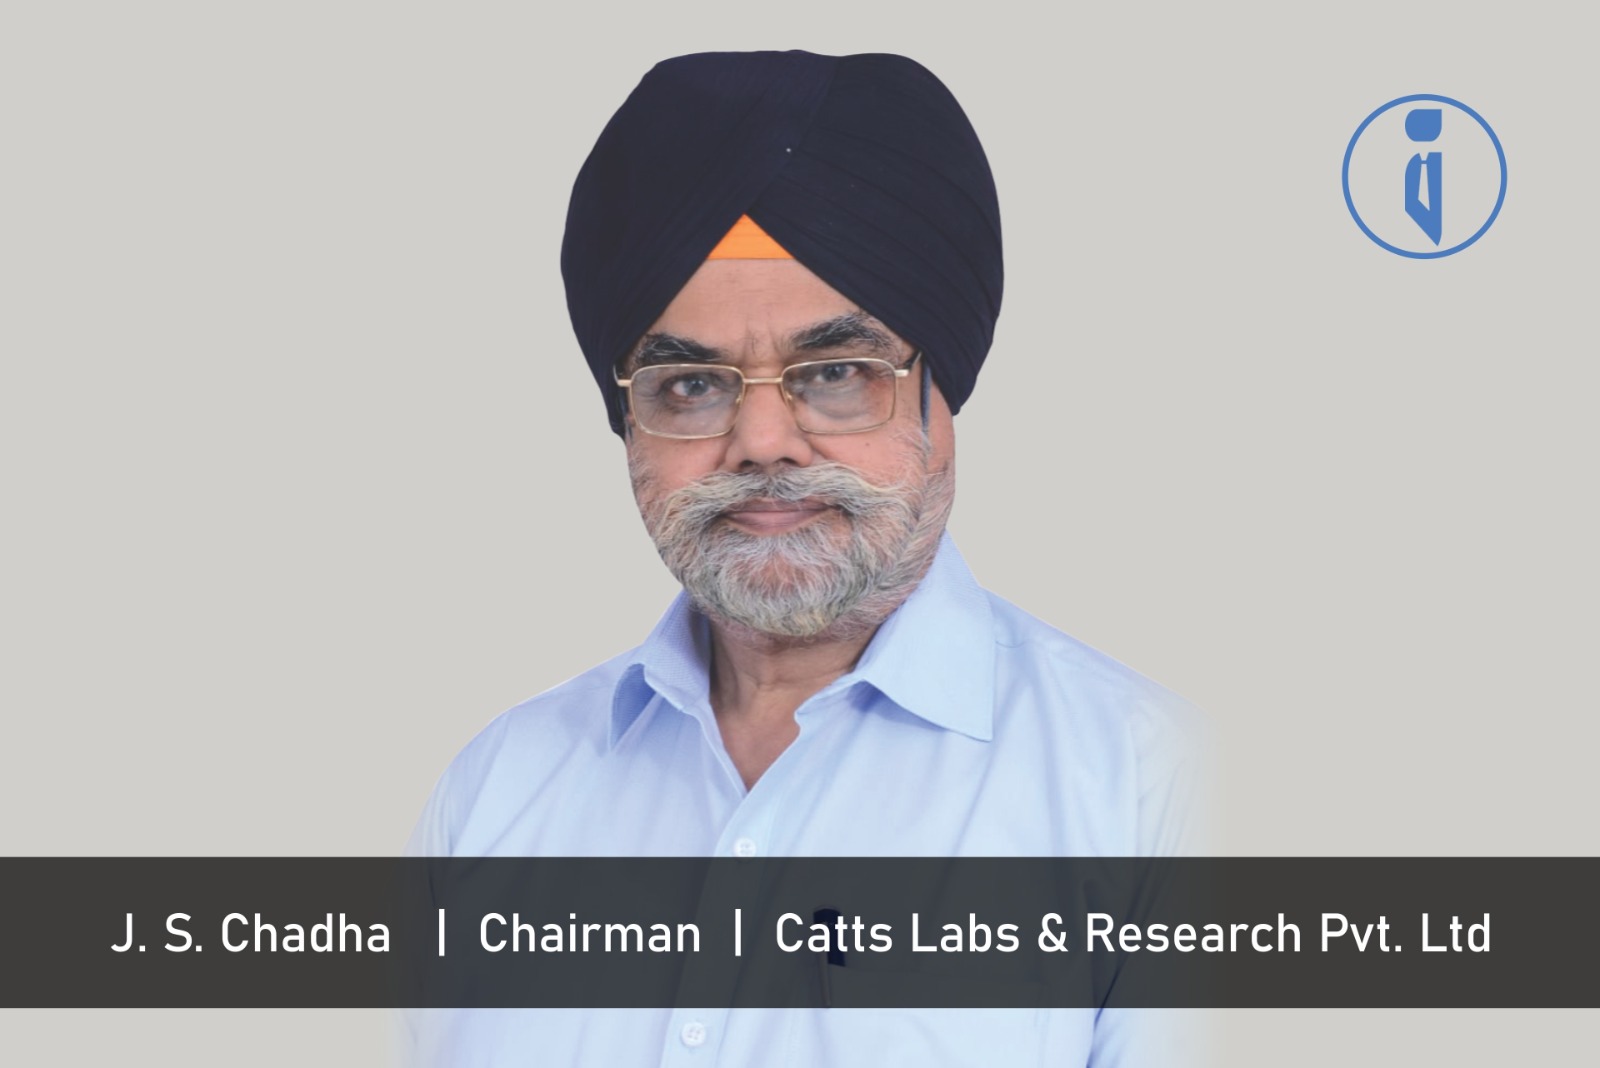 CATTS LABS & RESEARCH PVT. LTD. – A Reliable Laboratory of India Delivering Excellent Testing & Analysis Solutions